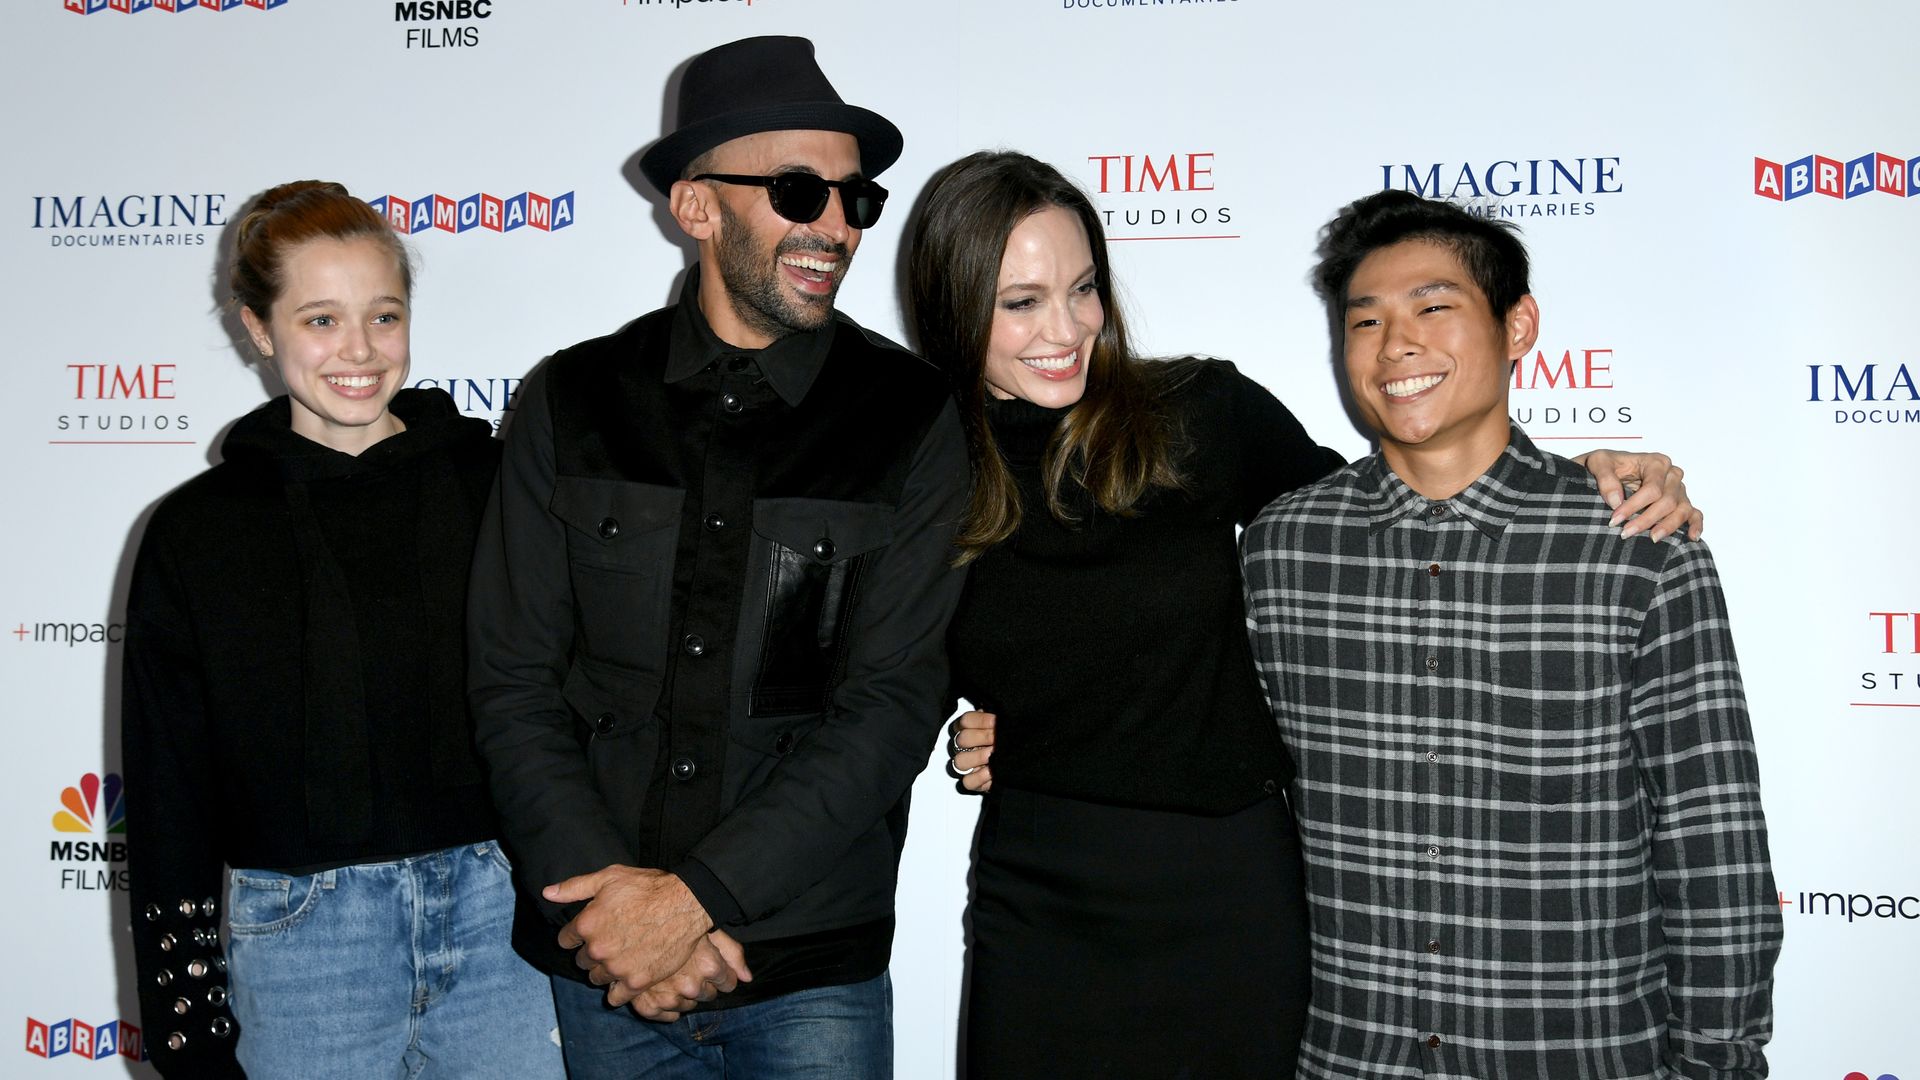 Angelina with Shiloh and Pax and her friend, street artist JR, smiling at each other on a red carpet